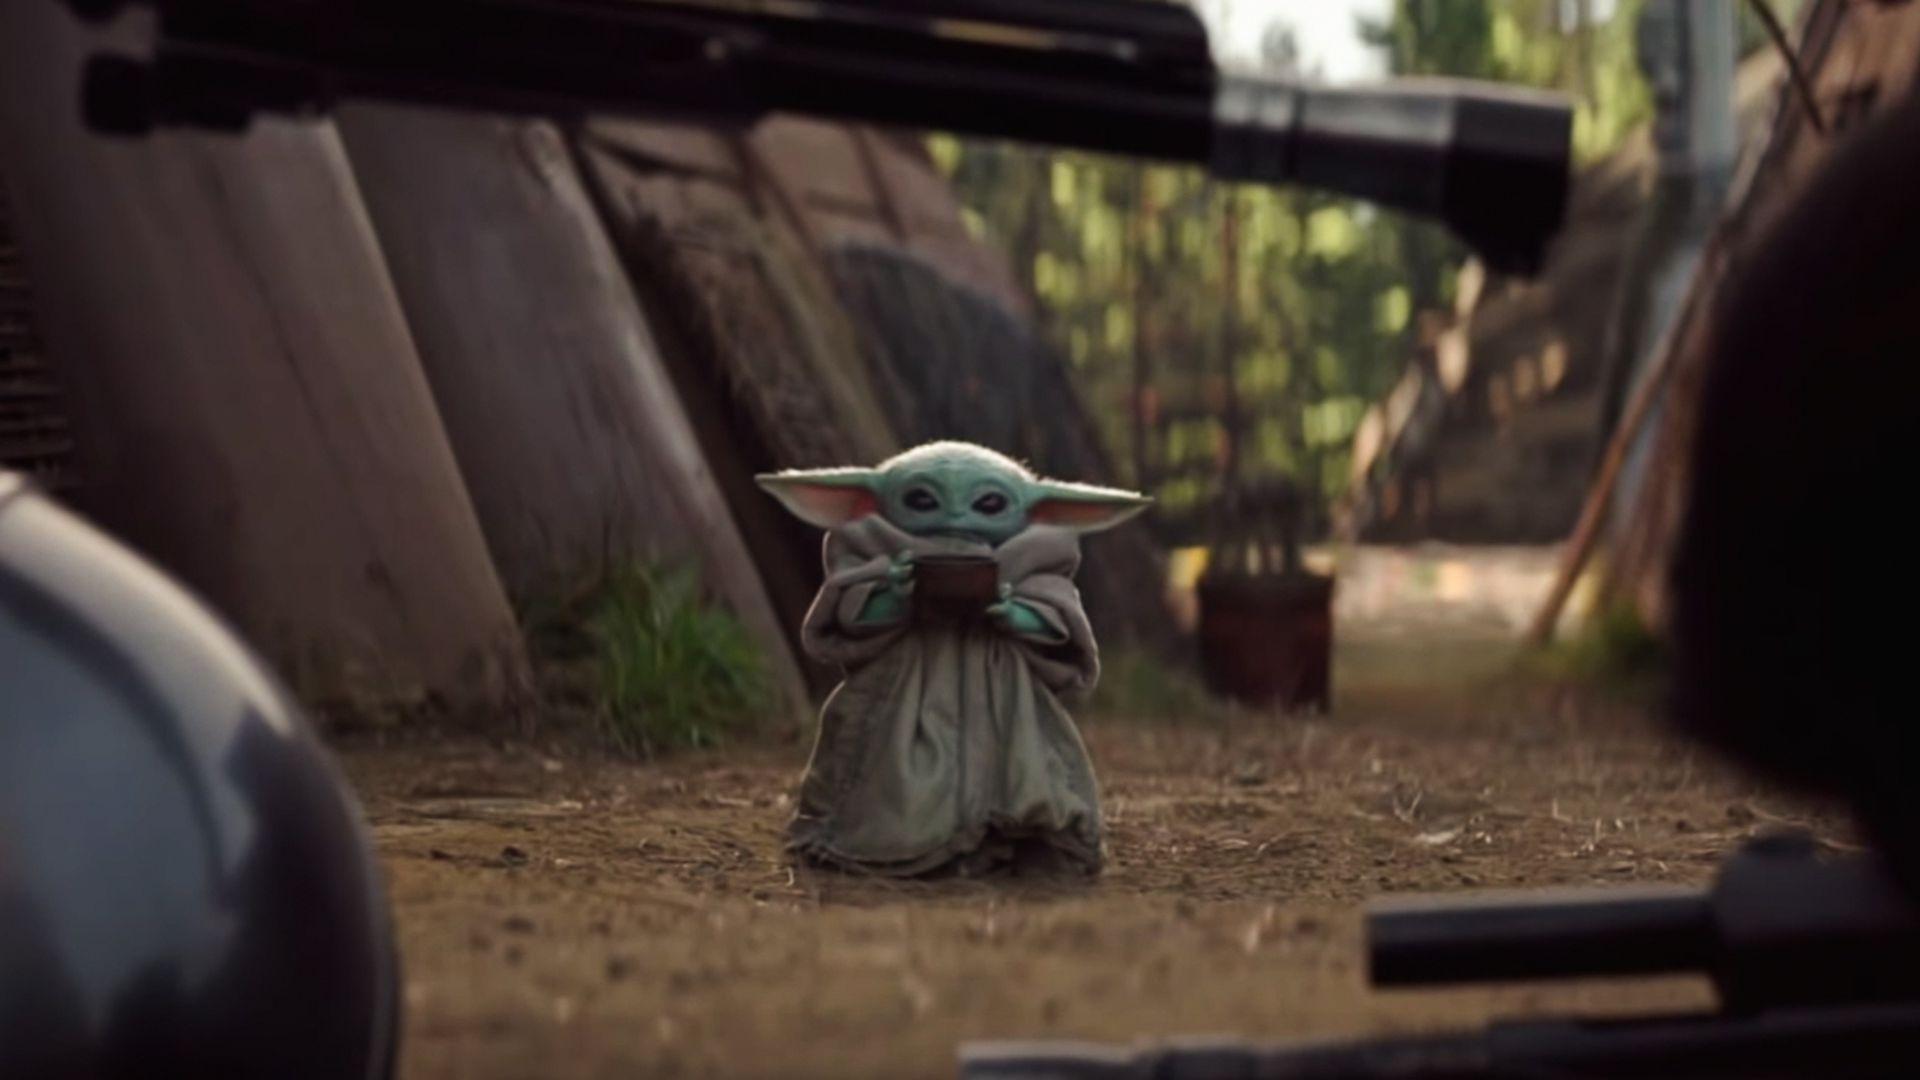 What % Baby Yoda Are You?